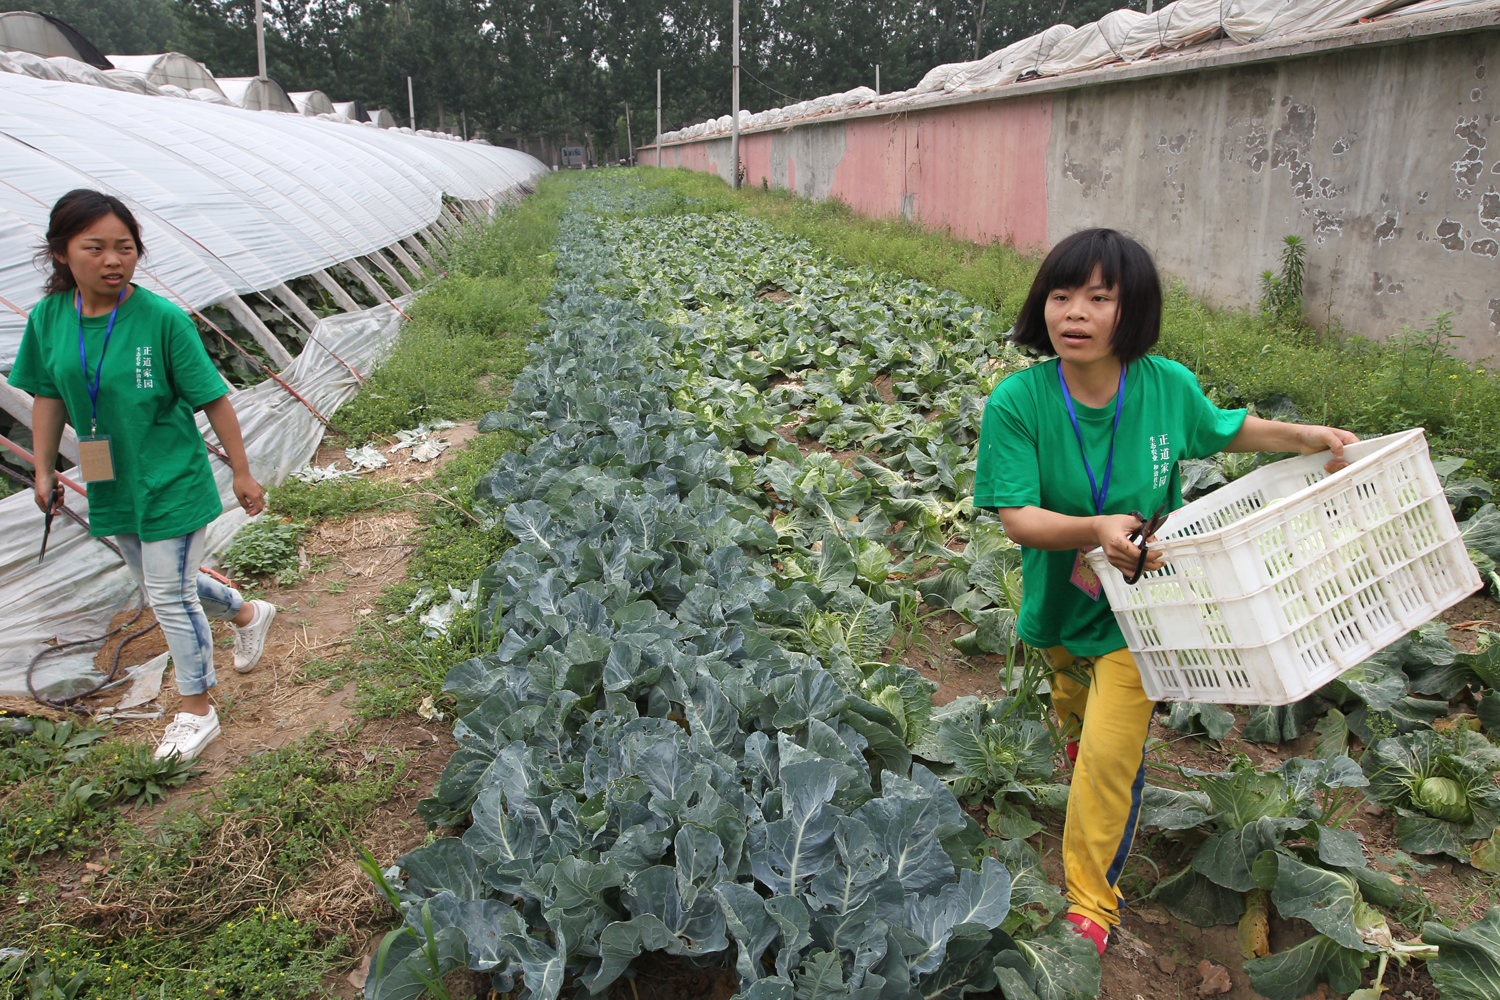 Staff at the Righteous Path Farm, in Hebei province, harvest their organic produce.